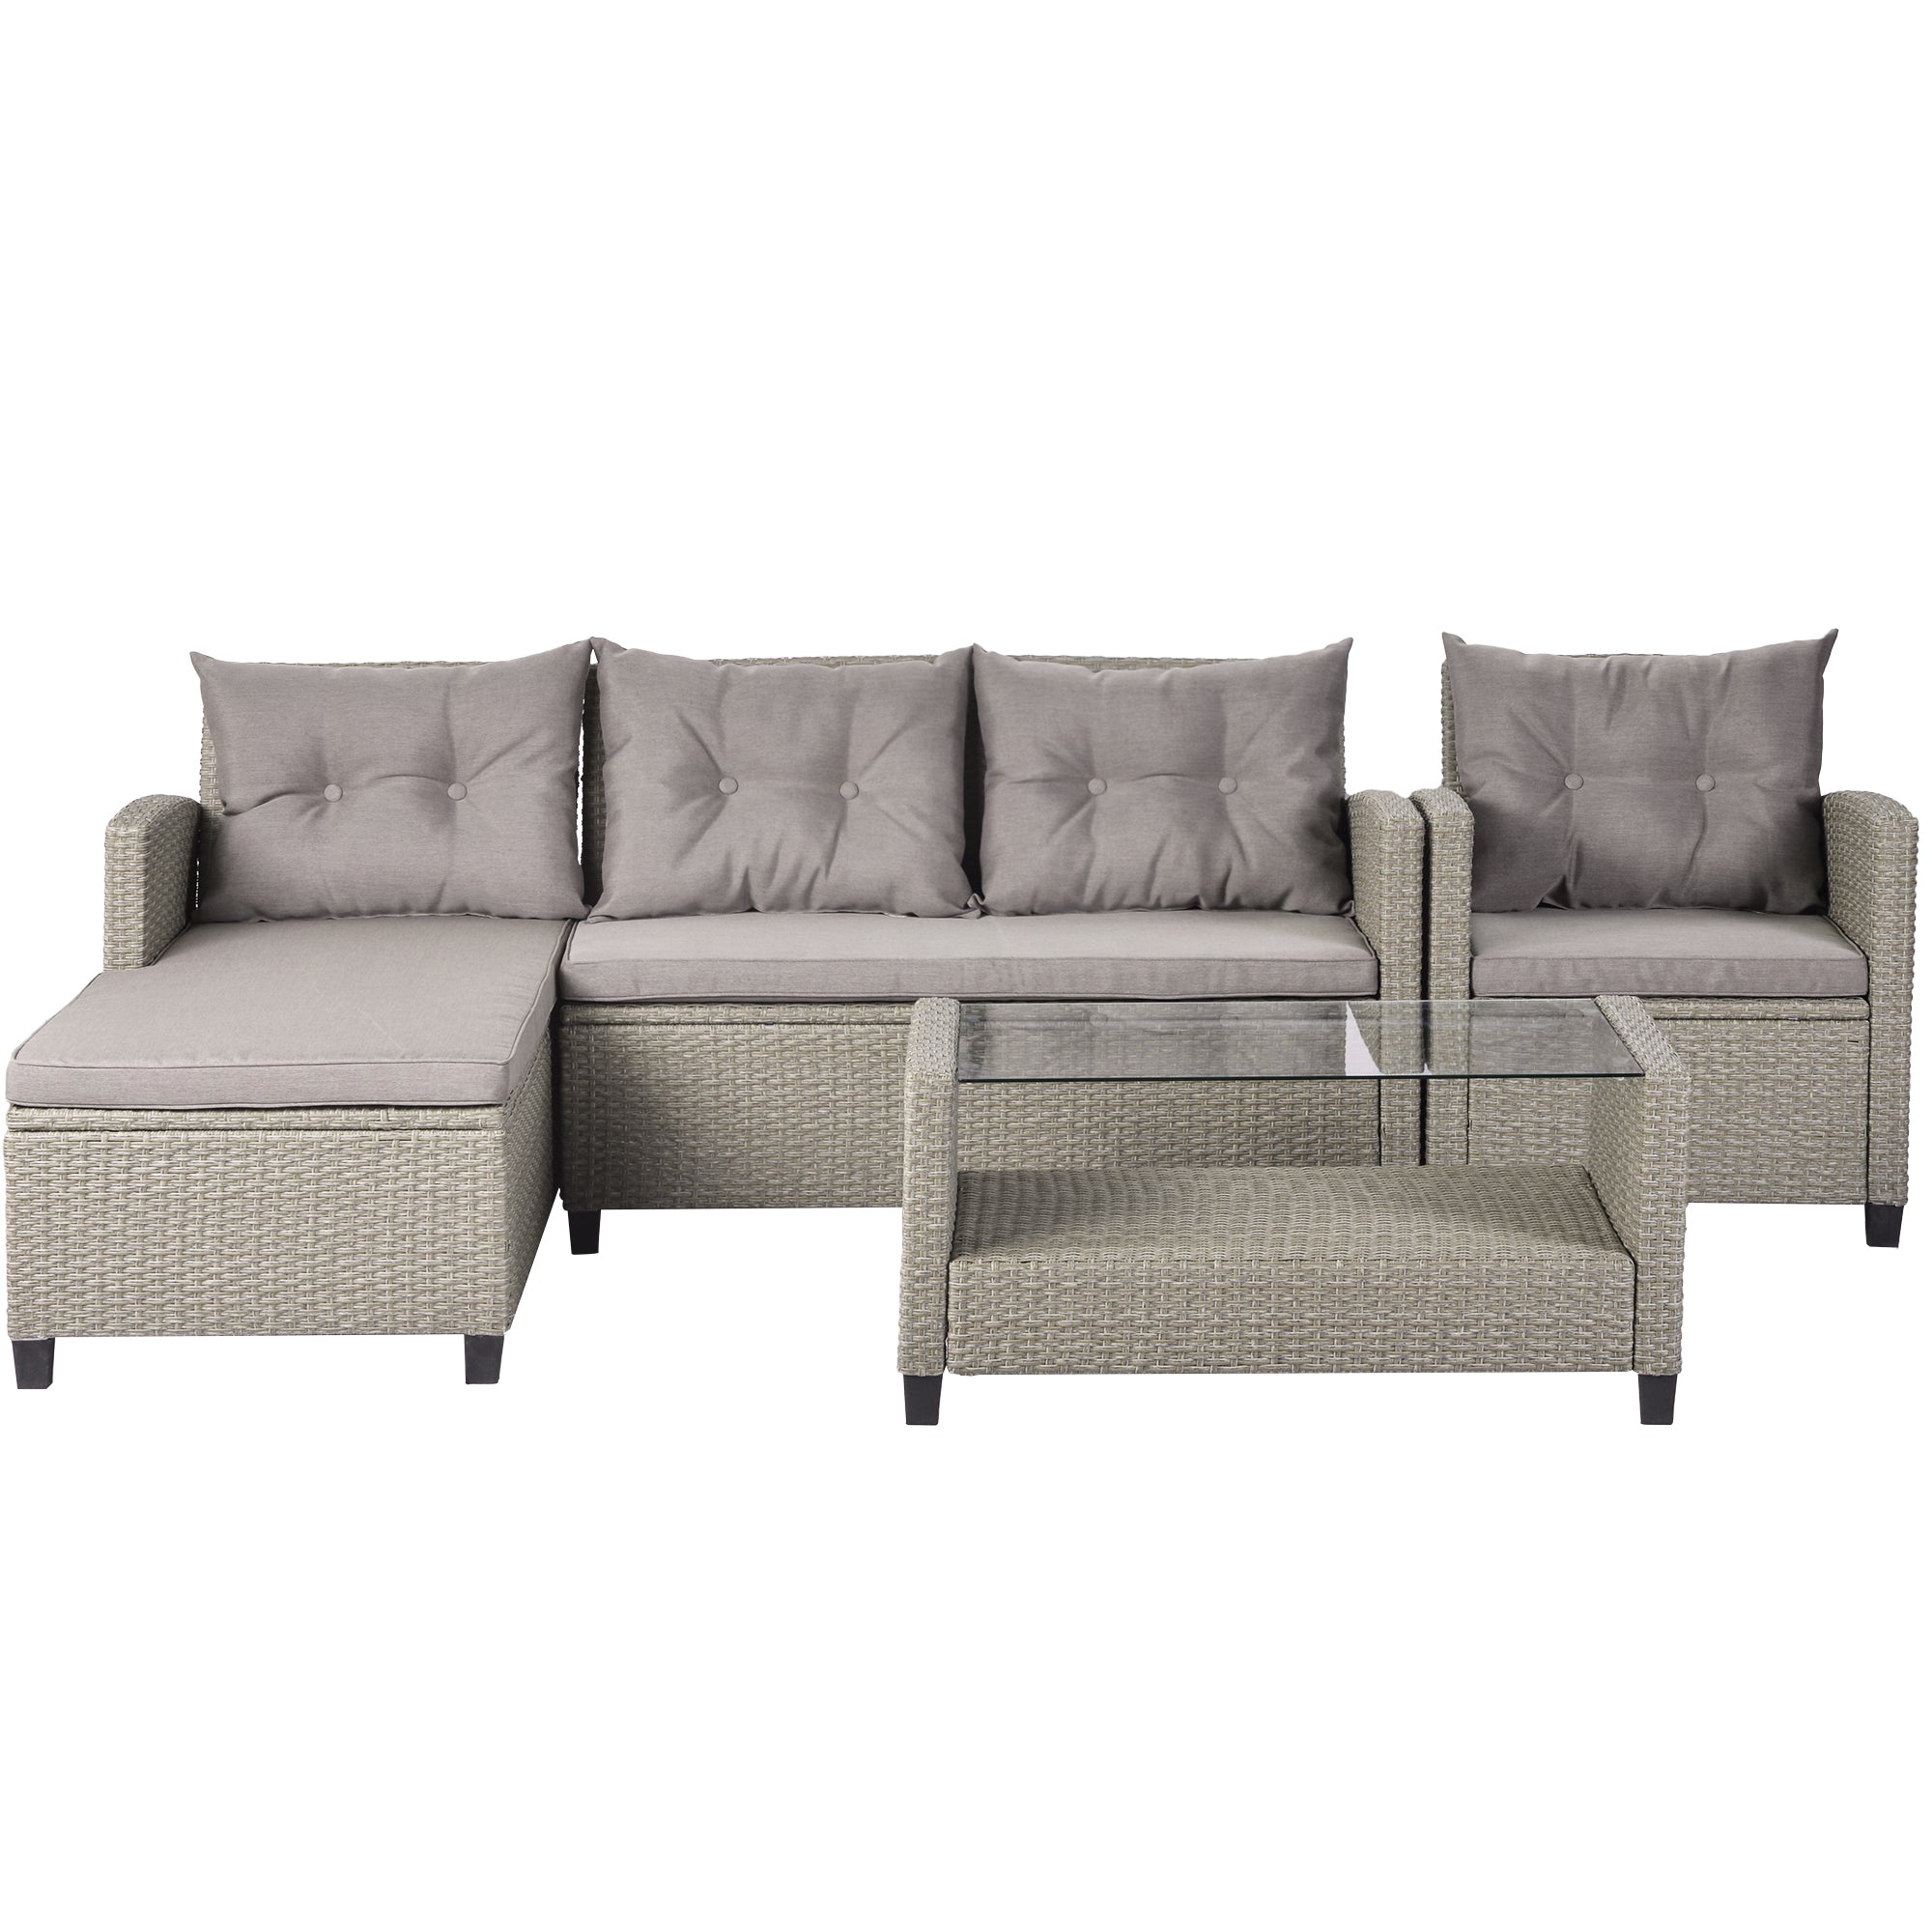 Outdoor, Patio Furniture Sets, 4 Piece Conversation Set Wicker Ratten Sectional Sofa with Seat Cushions